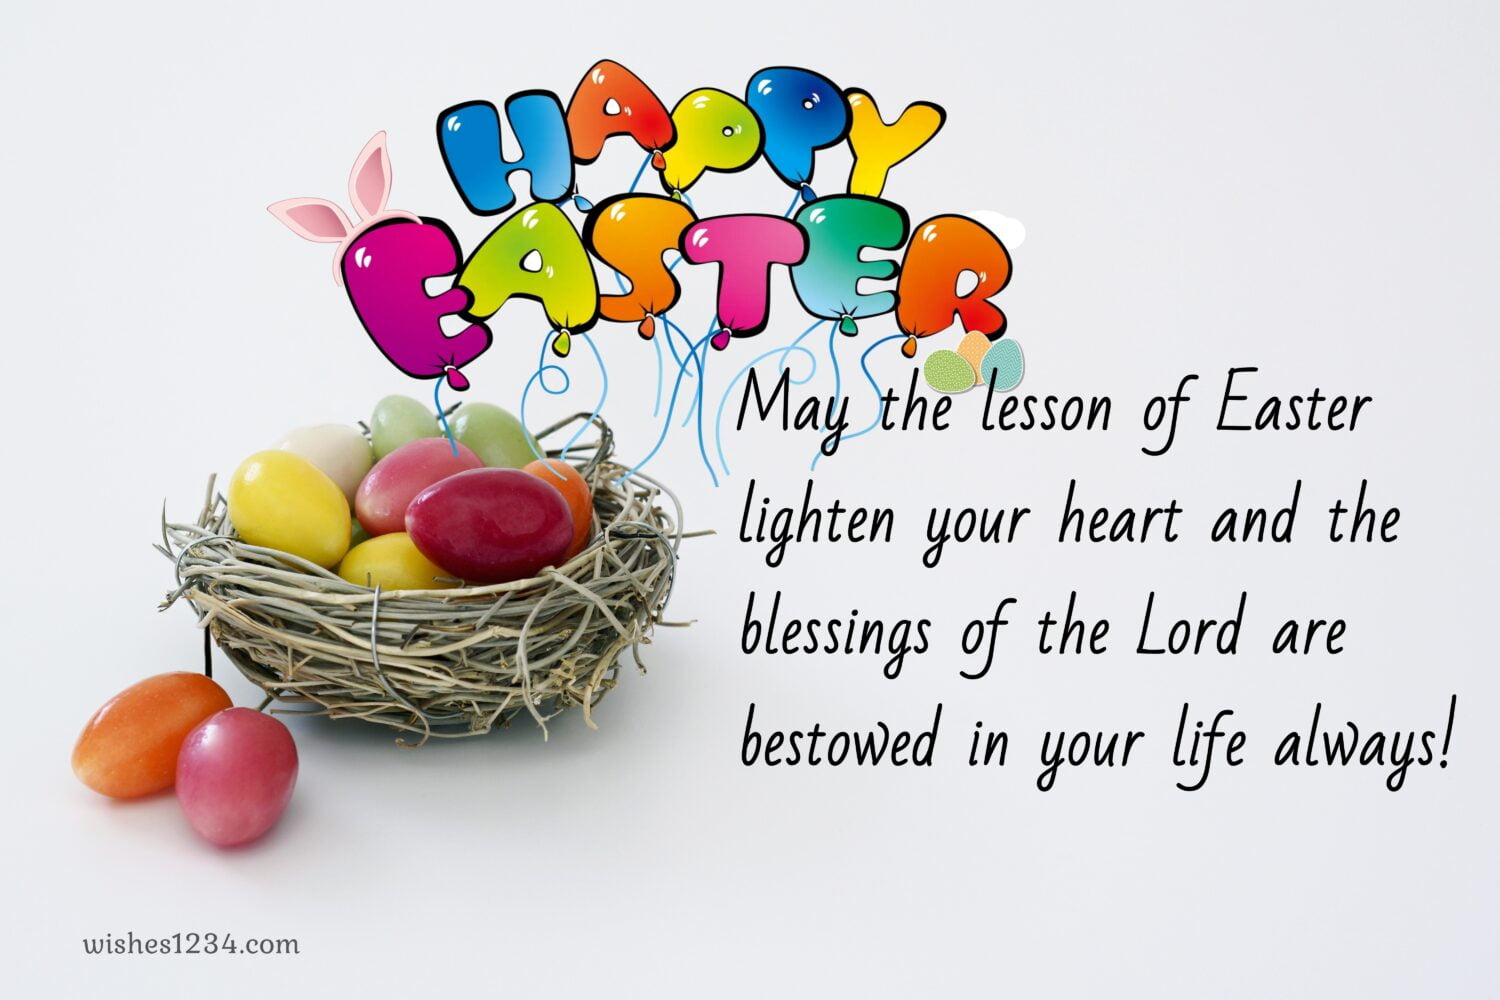 Easter eggs in basket, Happy Easter Wishes, Quotes & Images.